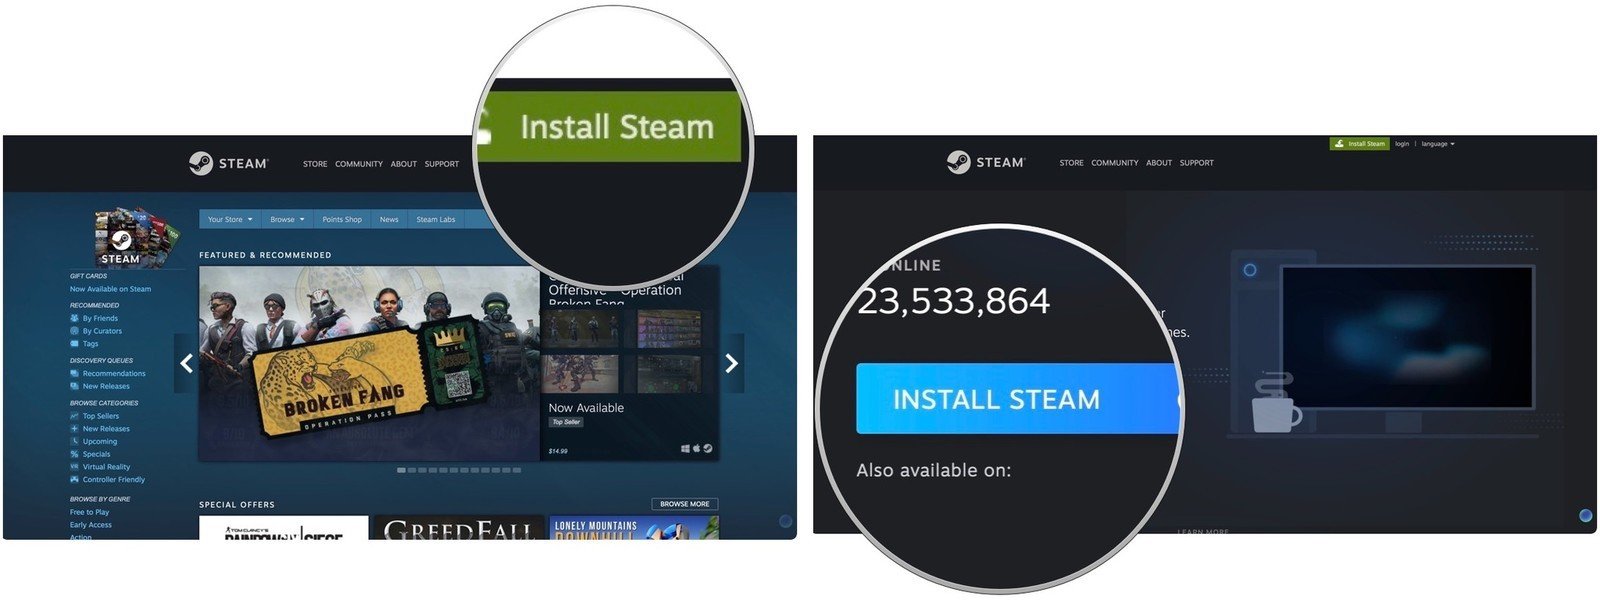 mac install steam for all users